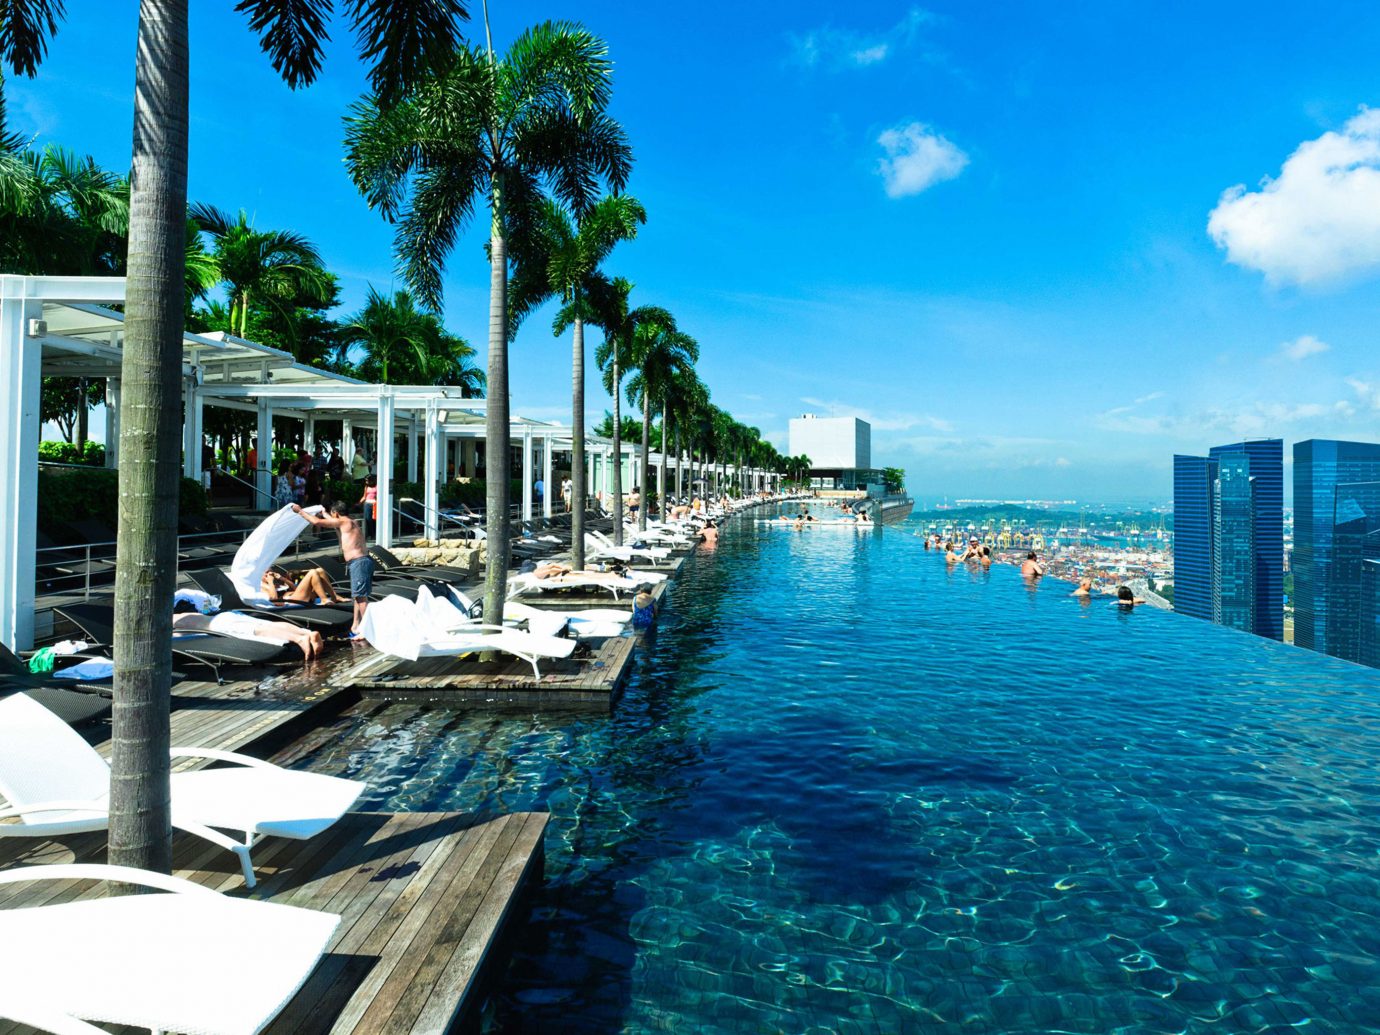 Infinity Pool At The Marina Bay Sands Hotel In Singapore